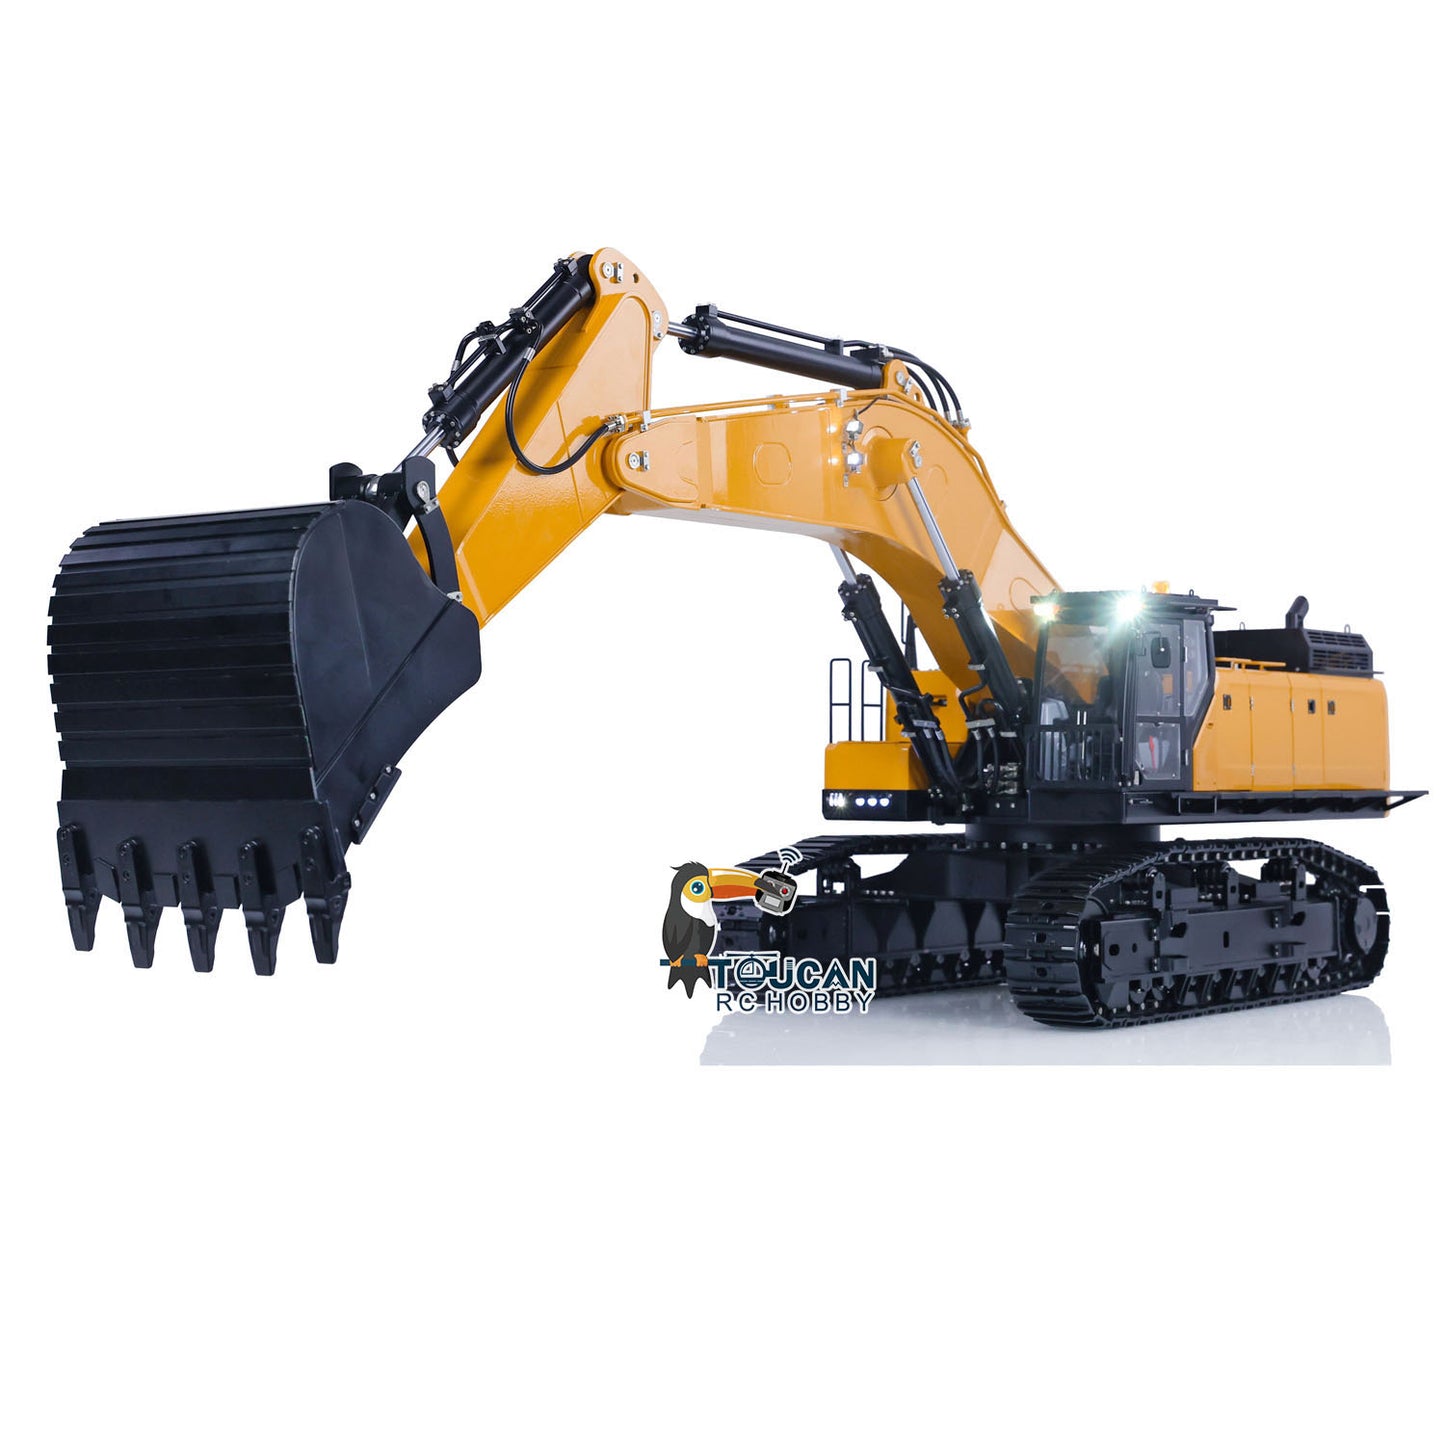 In Stock Kabolite K980 1/14 Hydraulic RC Excavator SY980H Giant PL18 Radio Control Digger Construction Vehicle DIY Emulated Car Toy